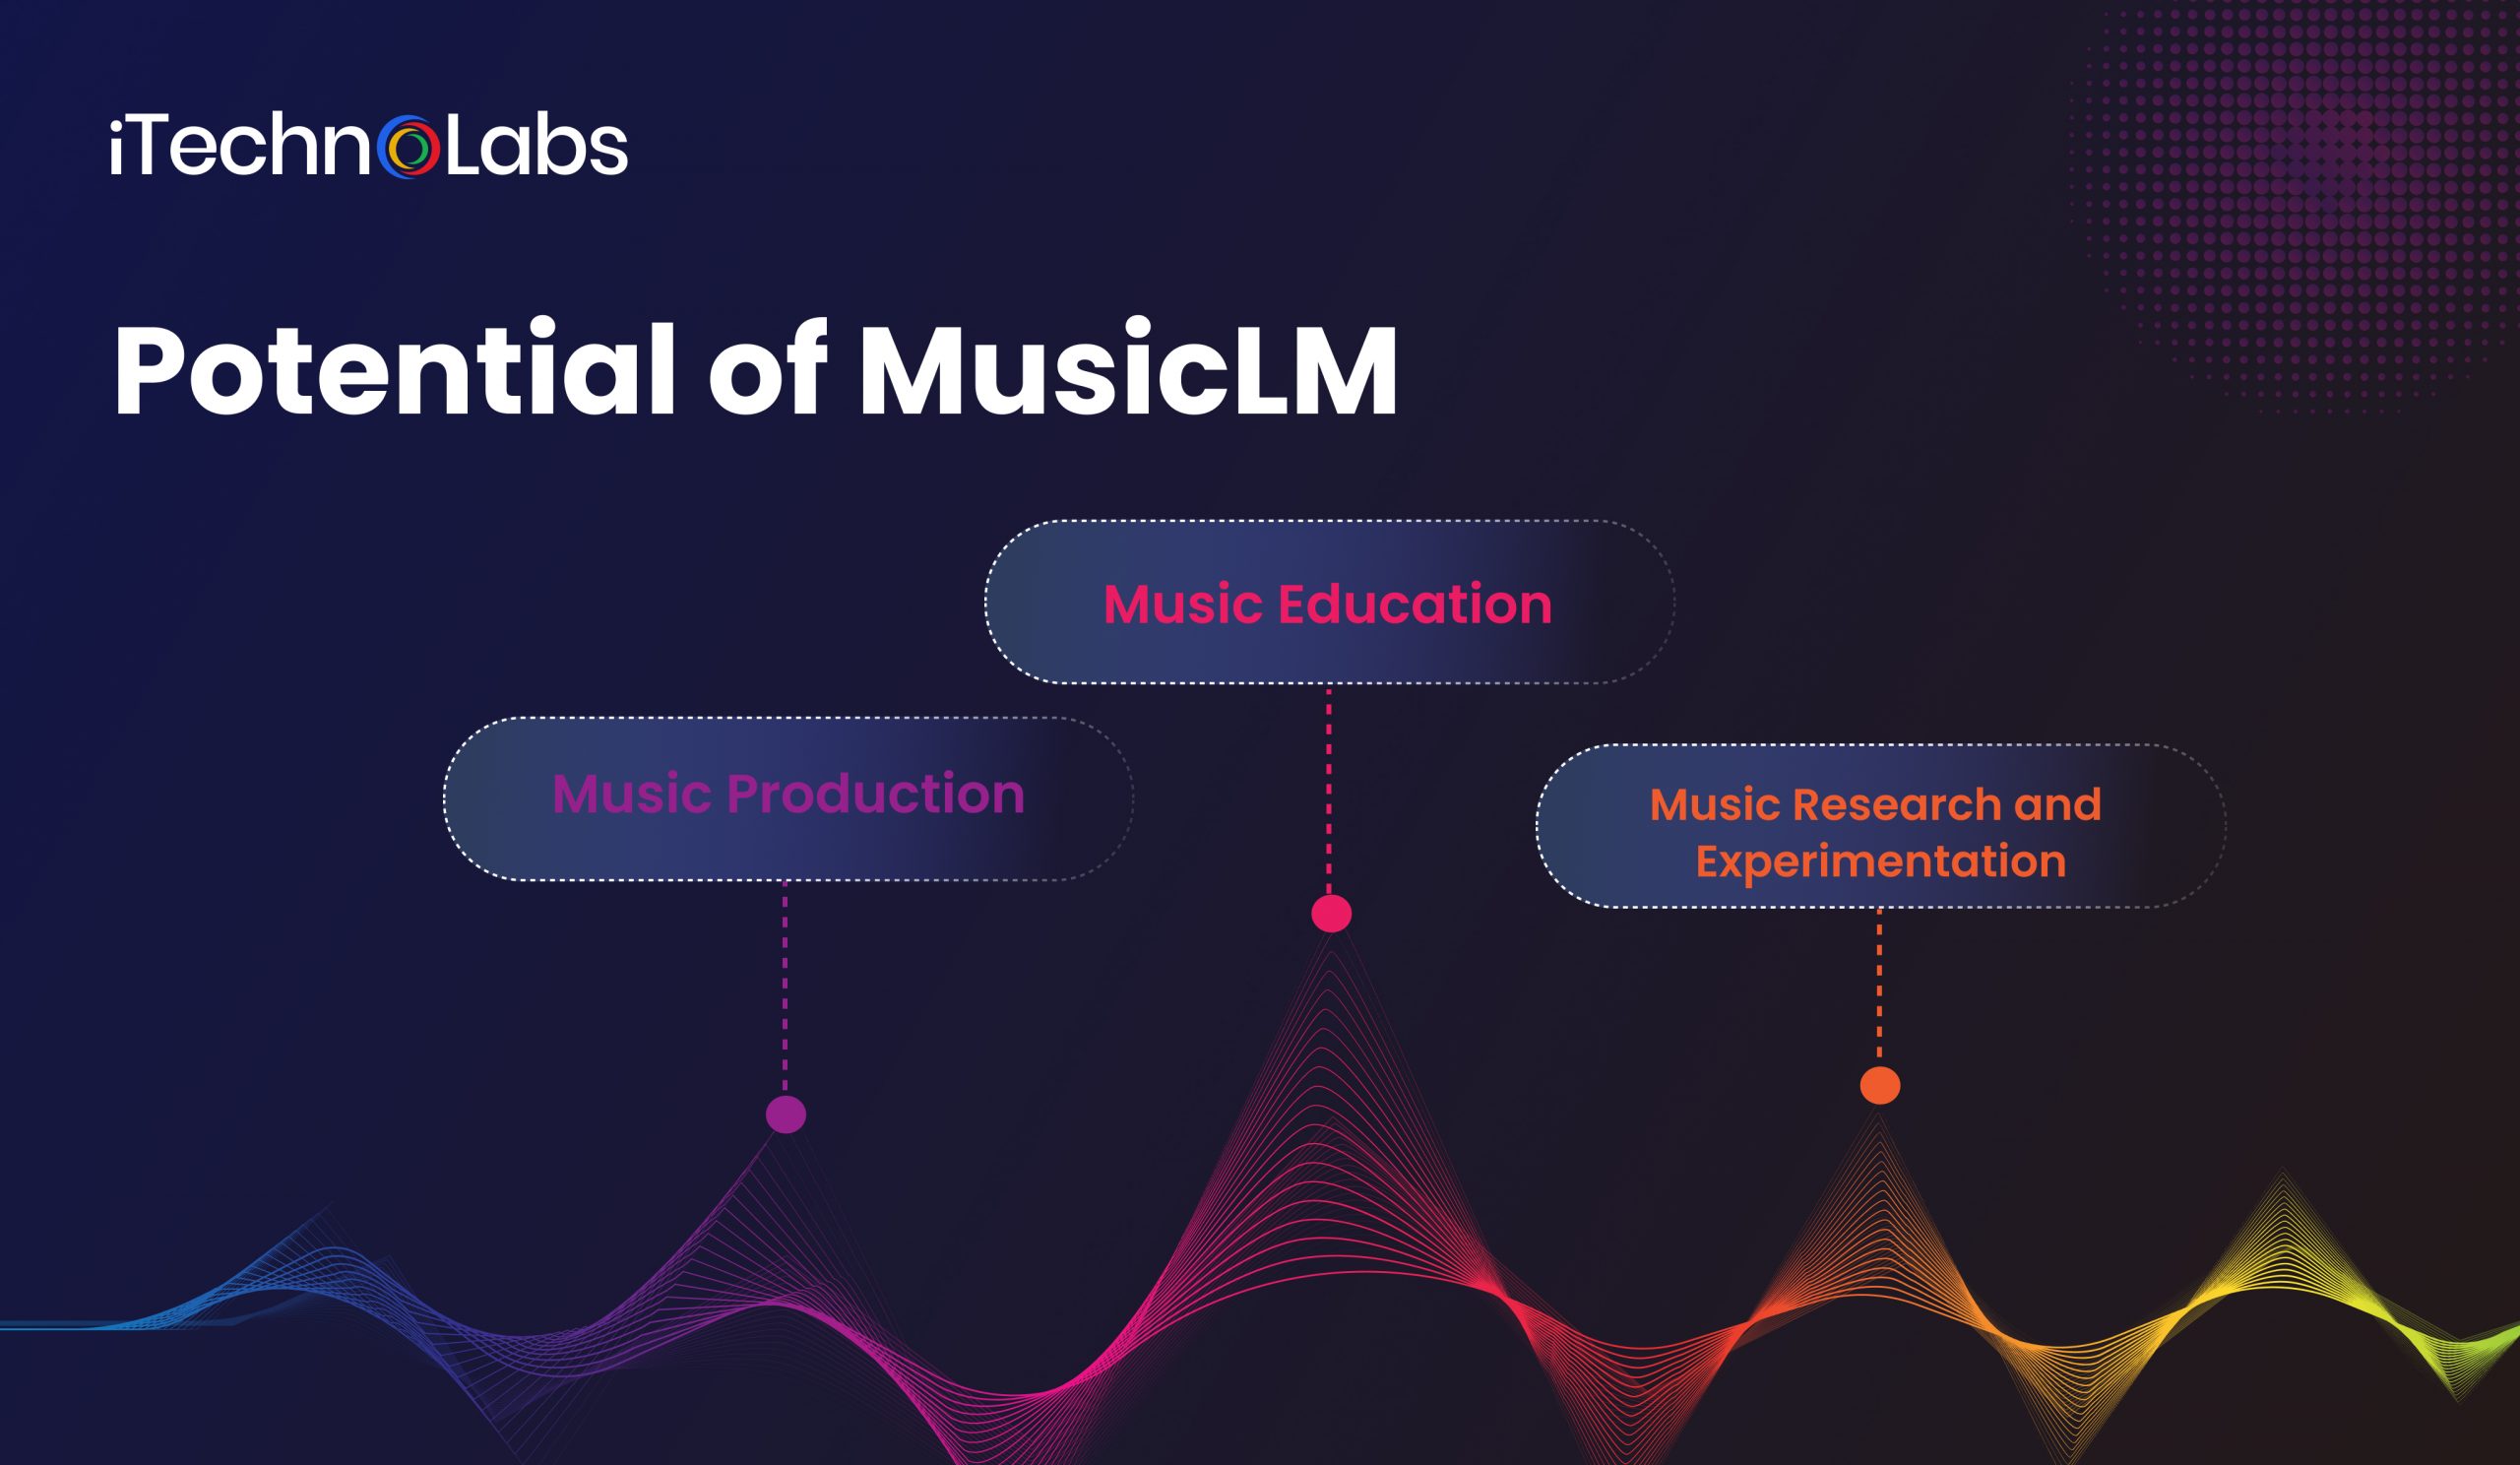 iTechnolabs-Potential of MusicLM